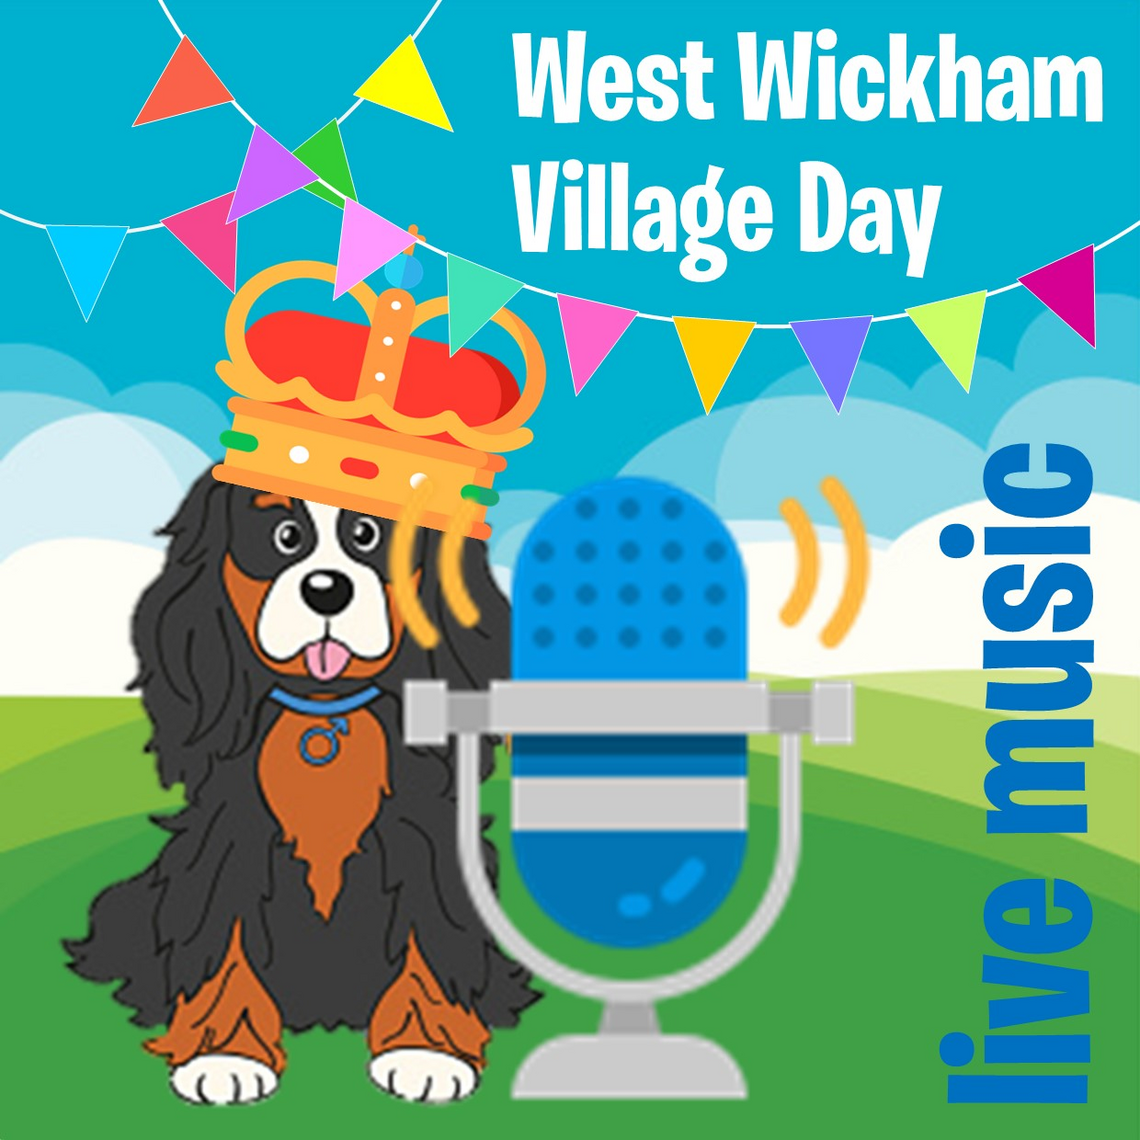 Image of dog wearing crown sitting next to microphone beside words 'West Wickham Village Day'